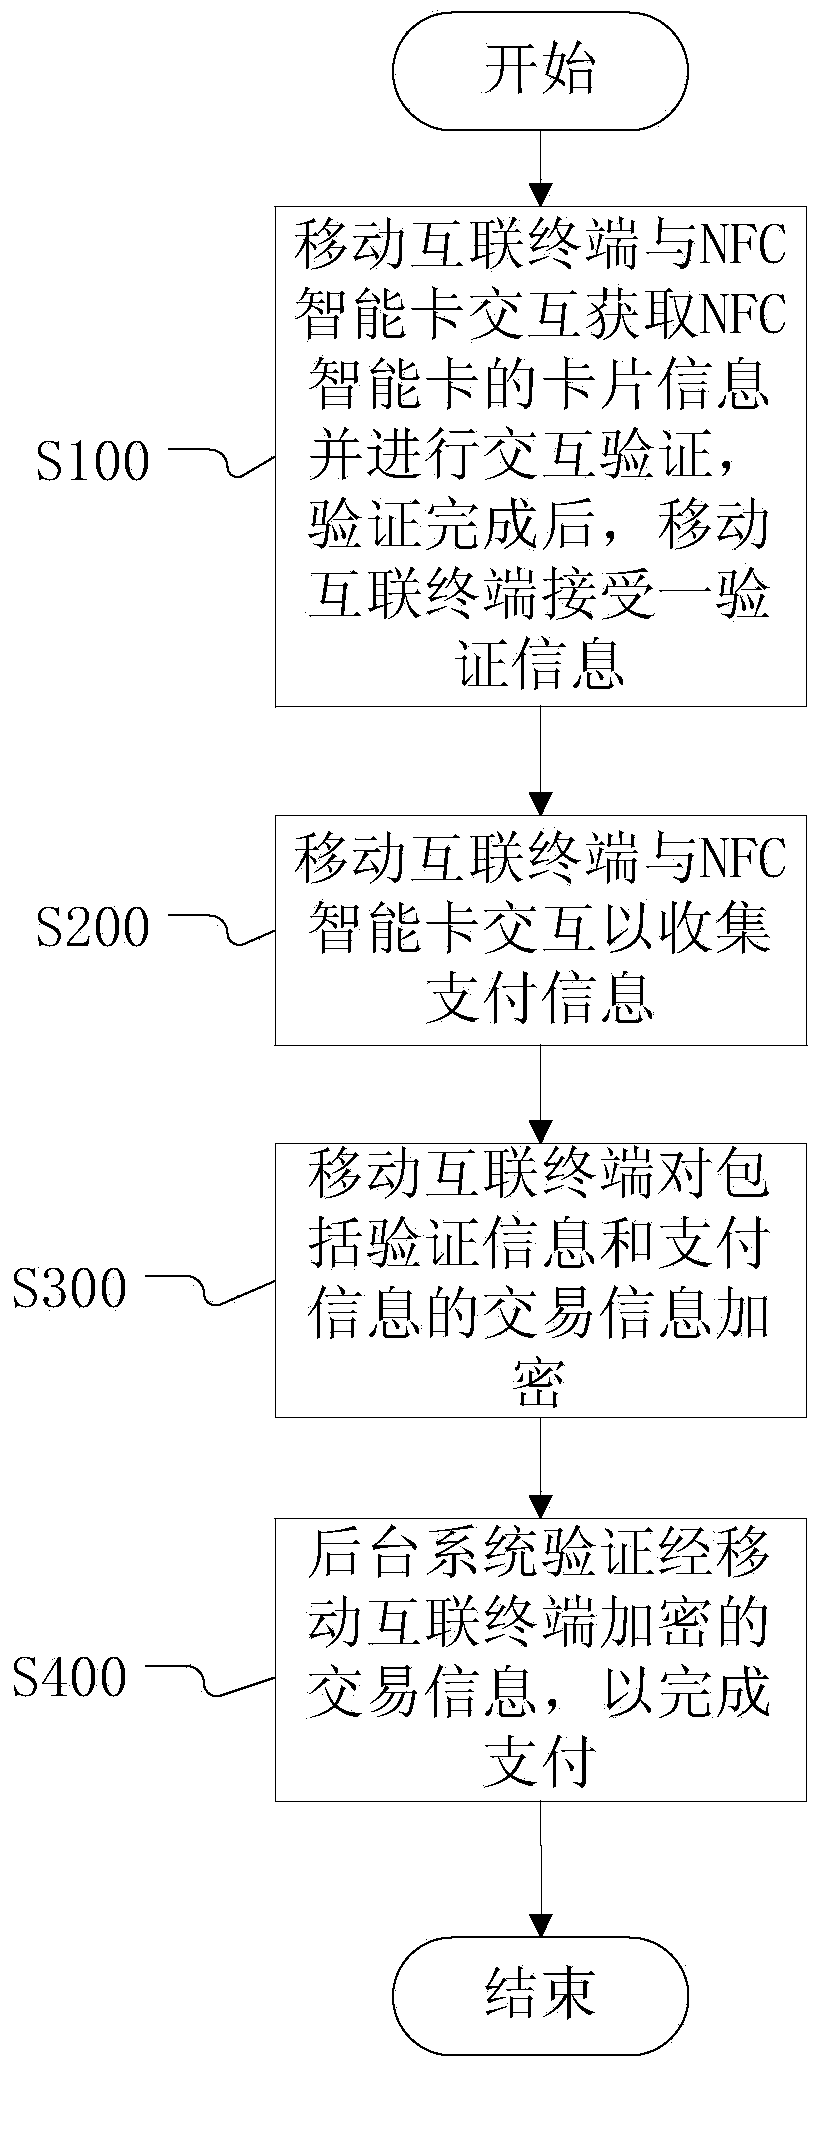 Payment processing method based on NFC smart card and mobile internet terminal